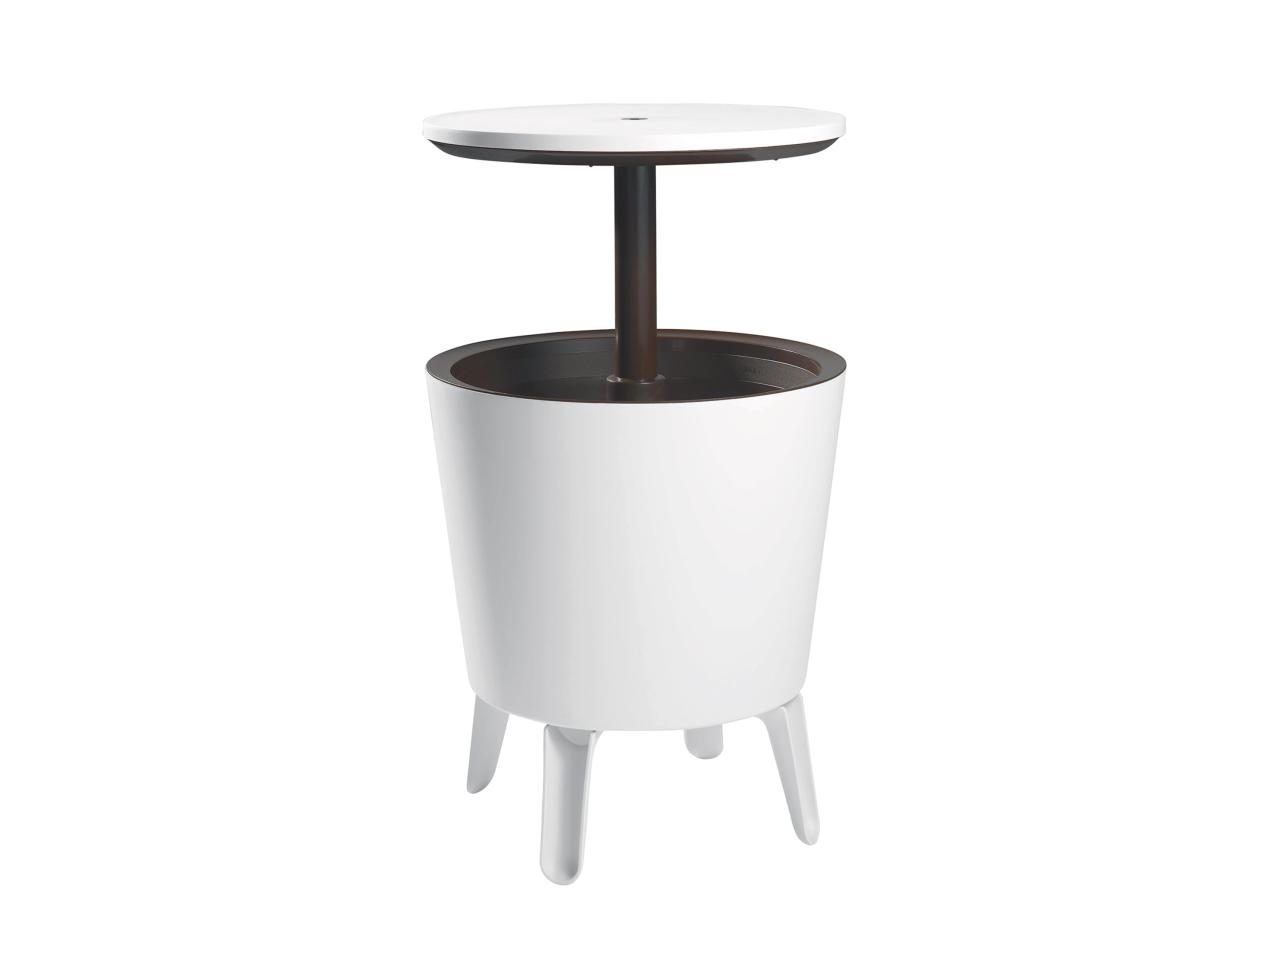 Livarno Living Party Table with Cooler1